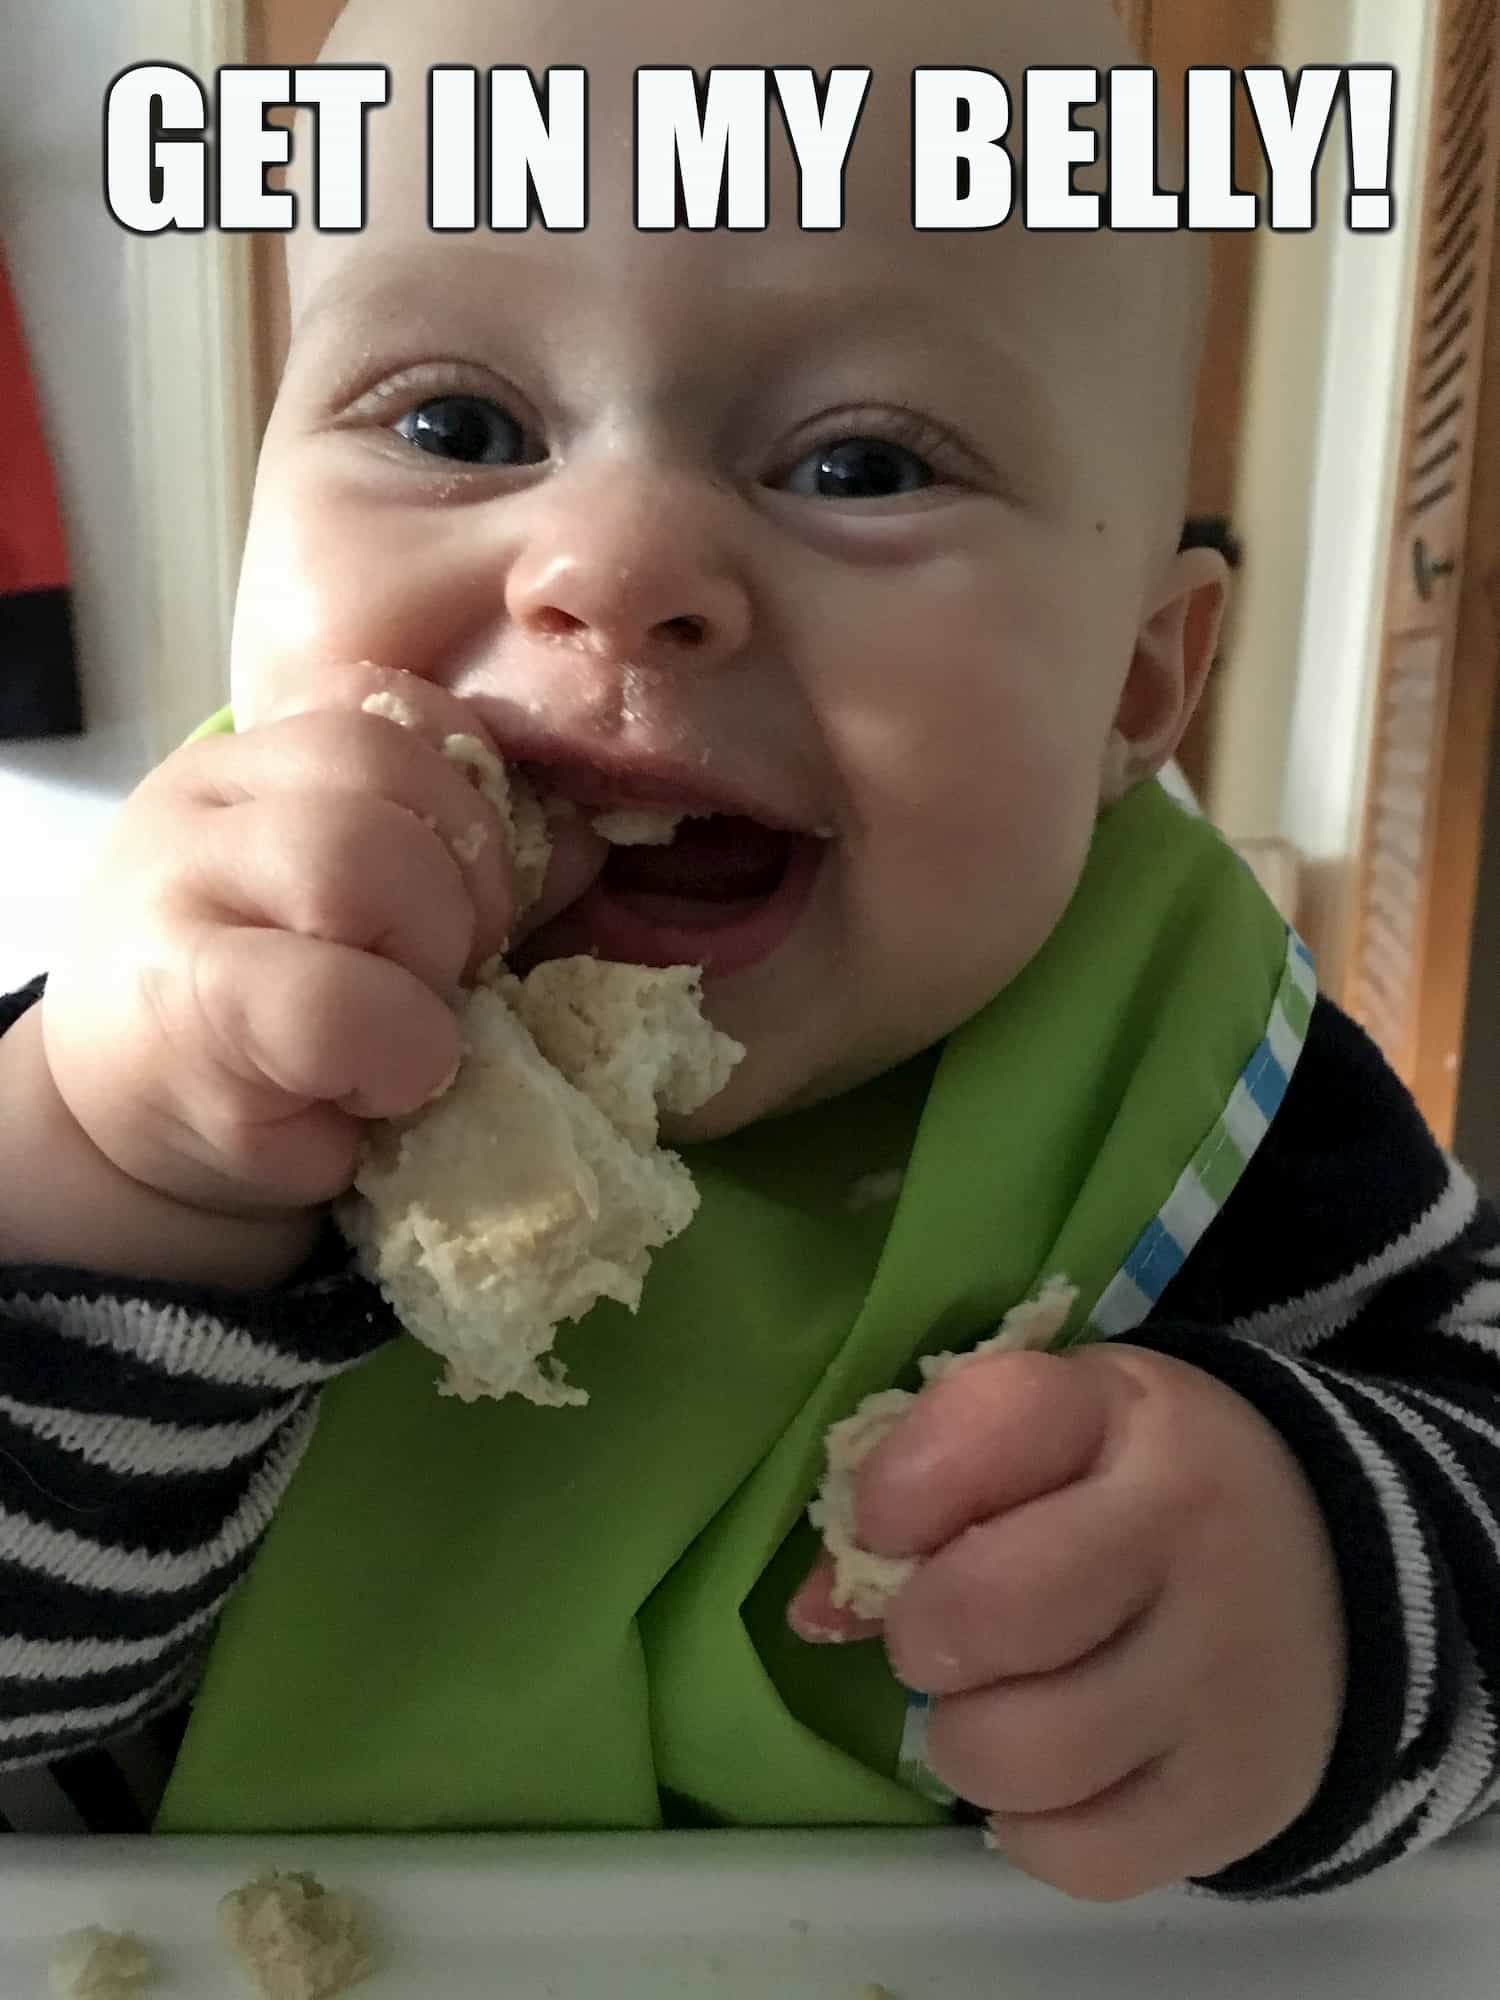 baby happily eating bread with caption Get in my Belly!